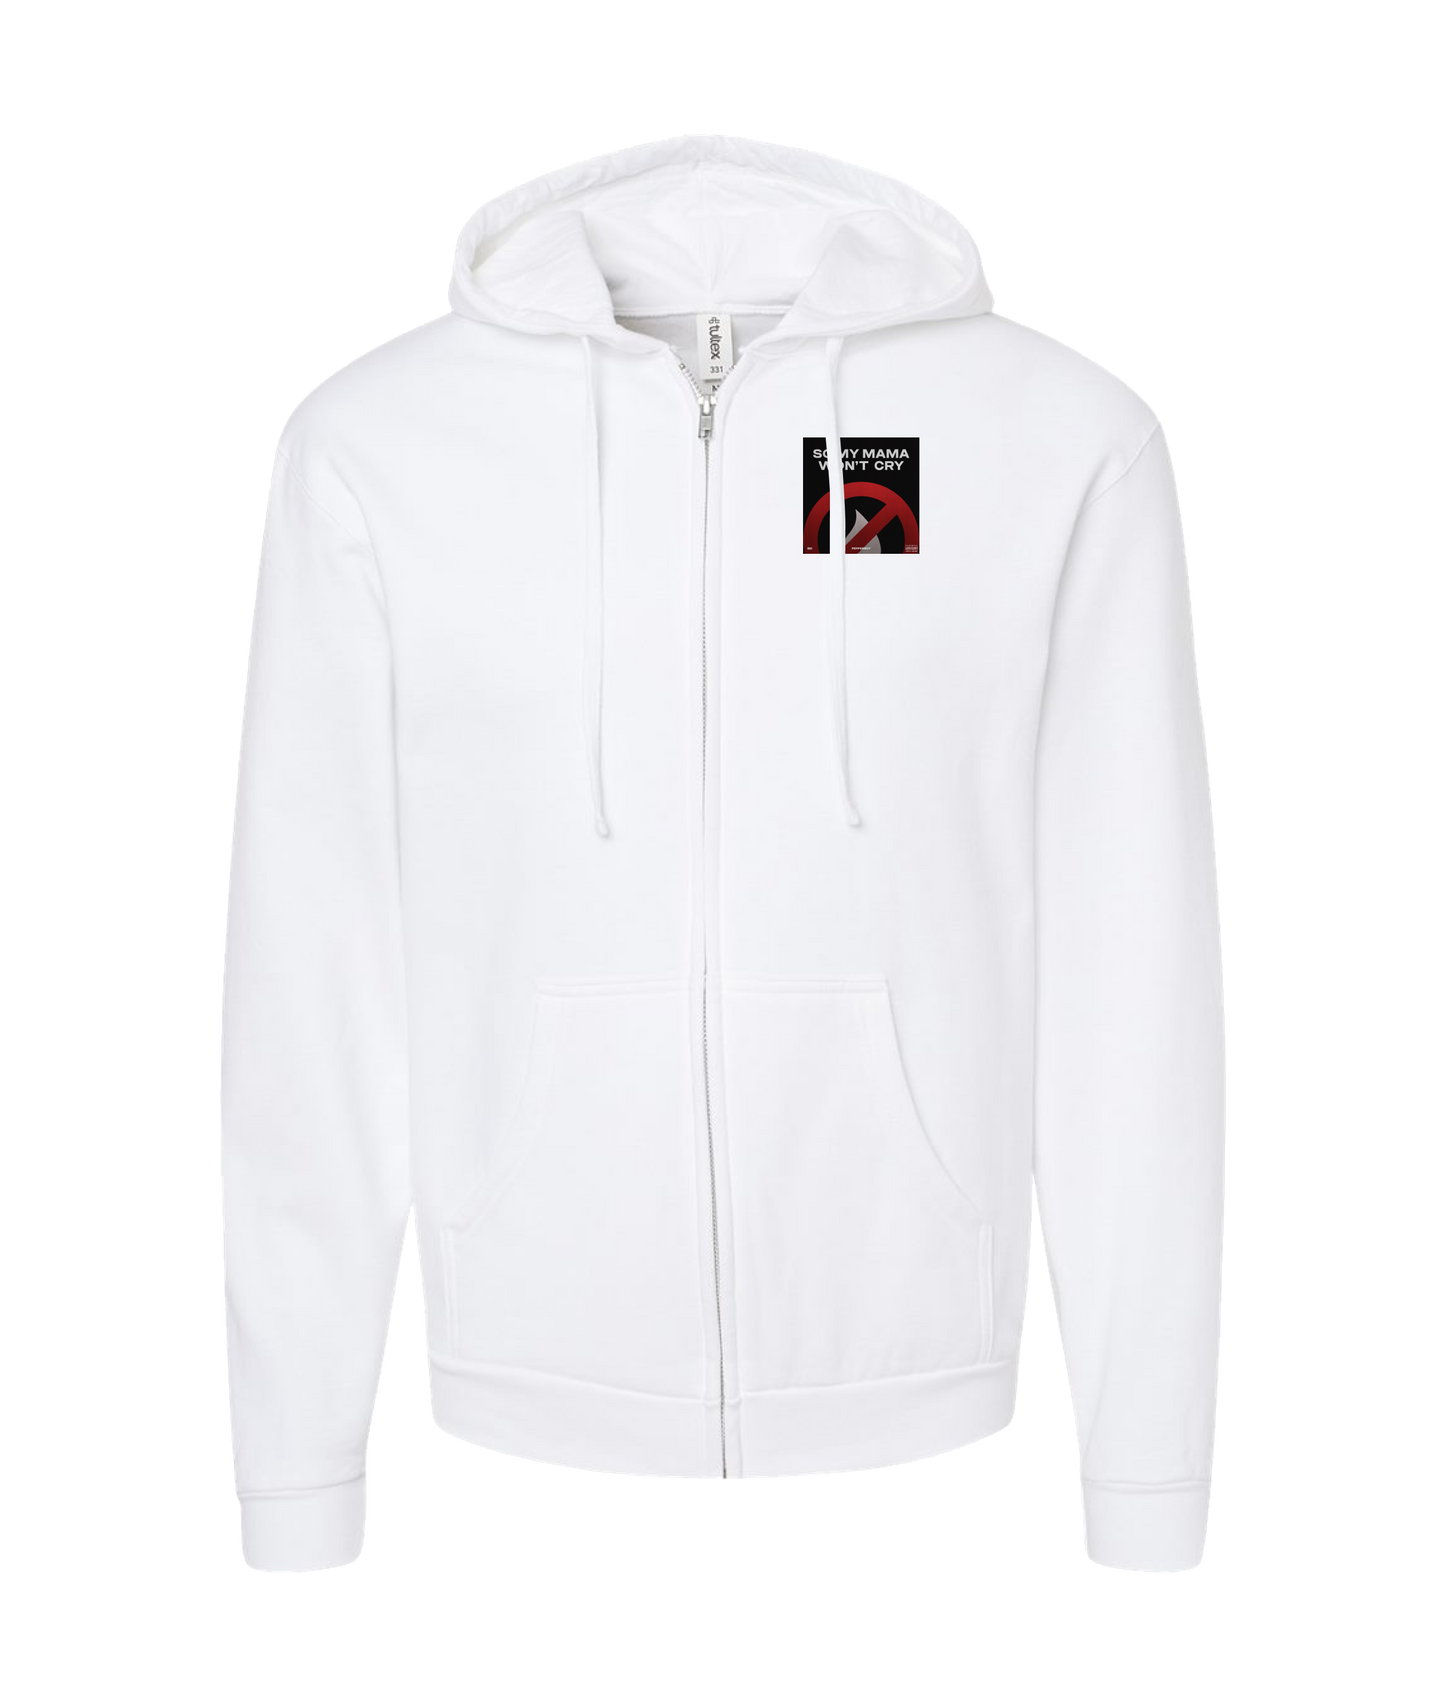 Pepperboy - So My Momma Wont Cry - White Zip Up Hoodie